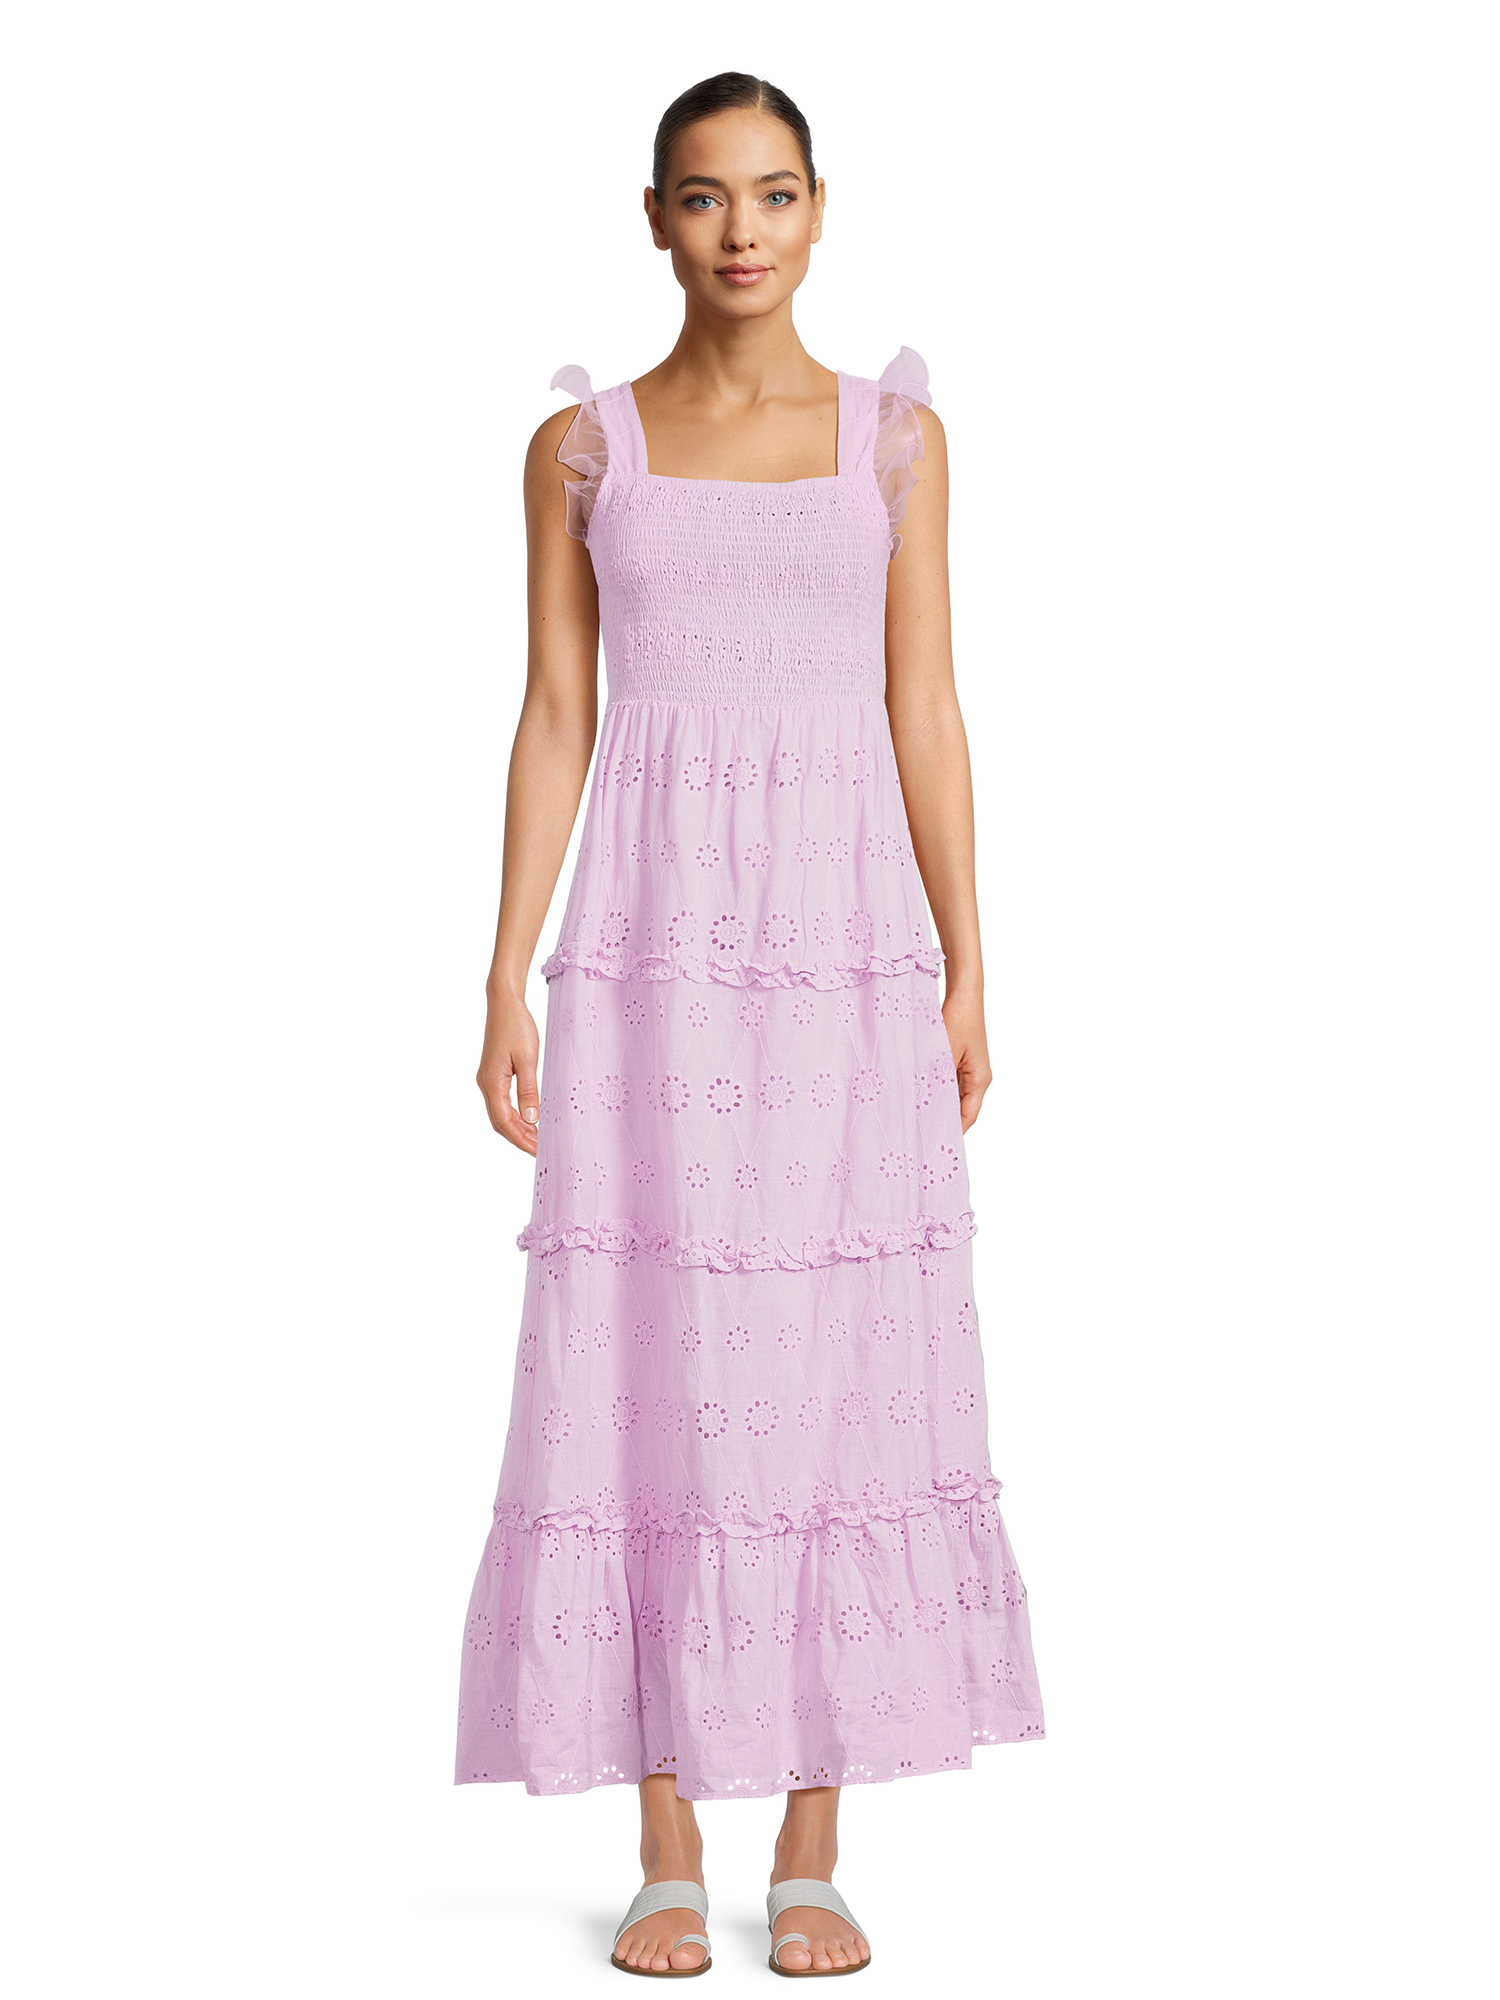 Label Rail x CheapChicFinds Women's Tiered Broderie Maxi Dress - image 4 of 7